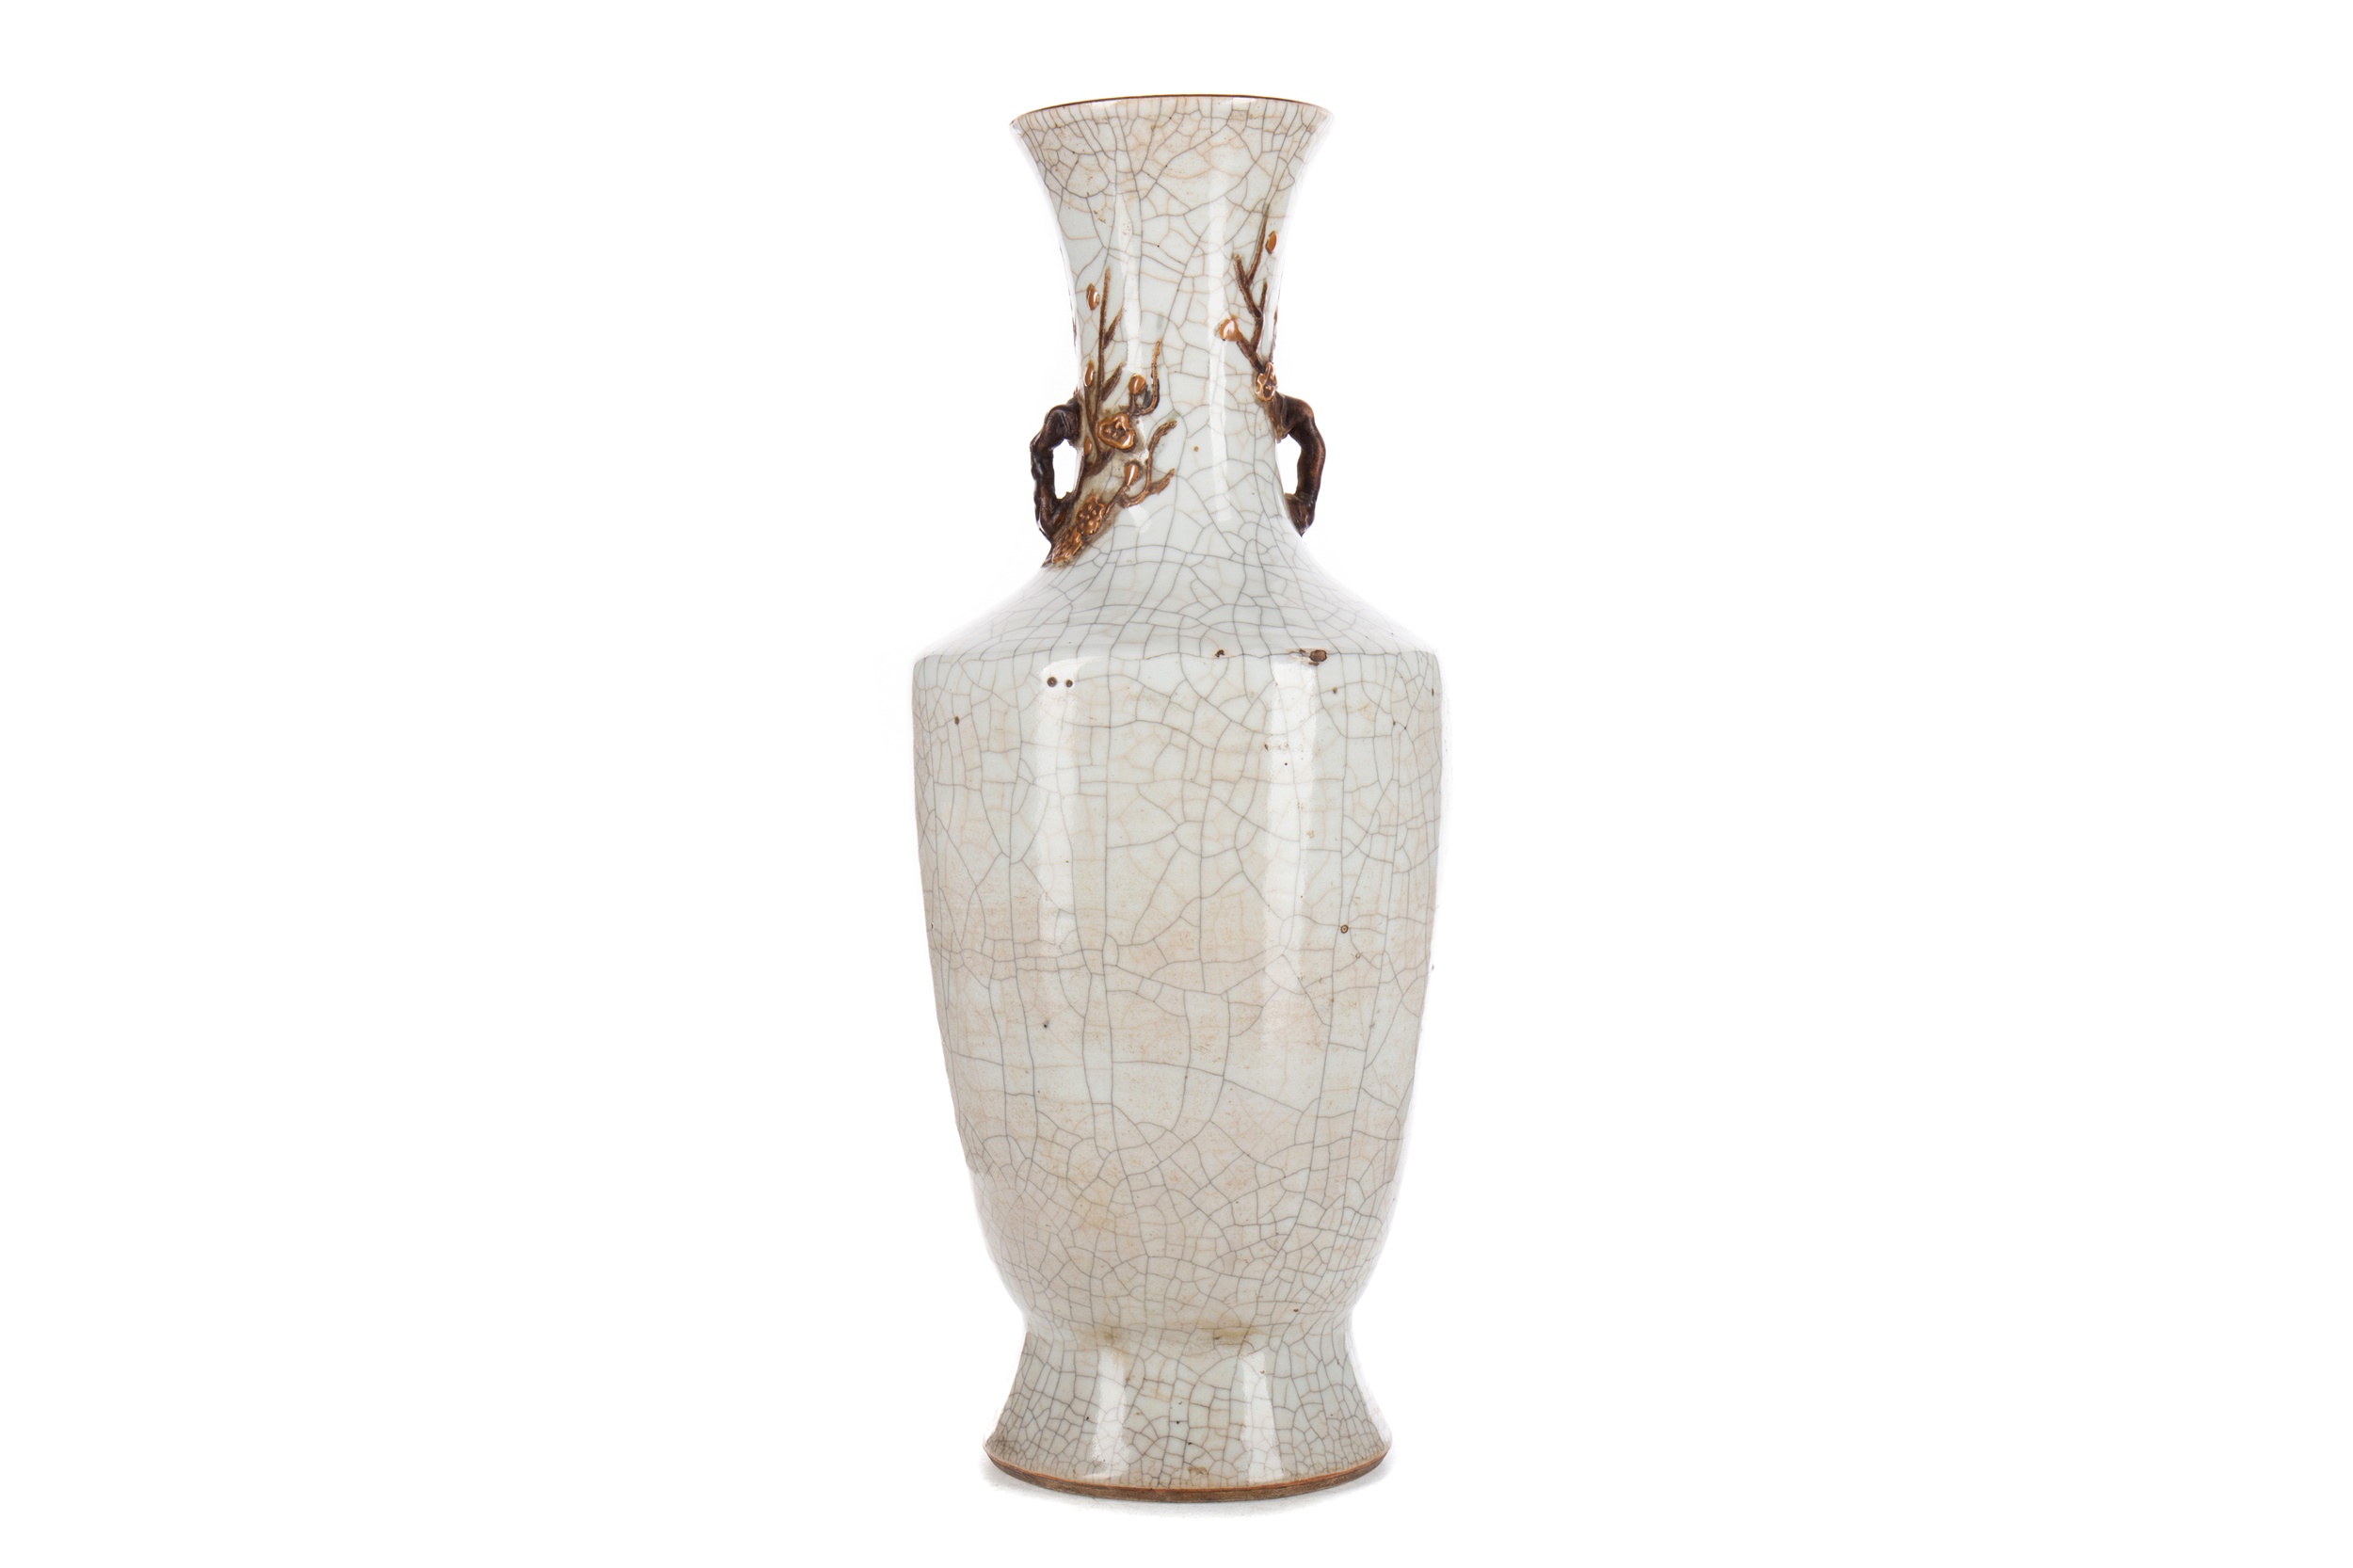 A CHINESE GE WARE VASE